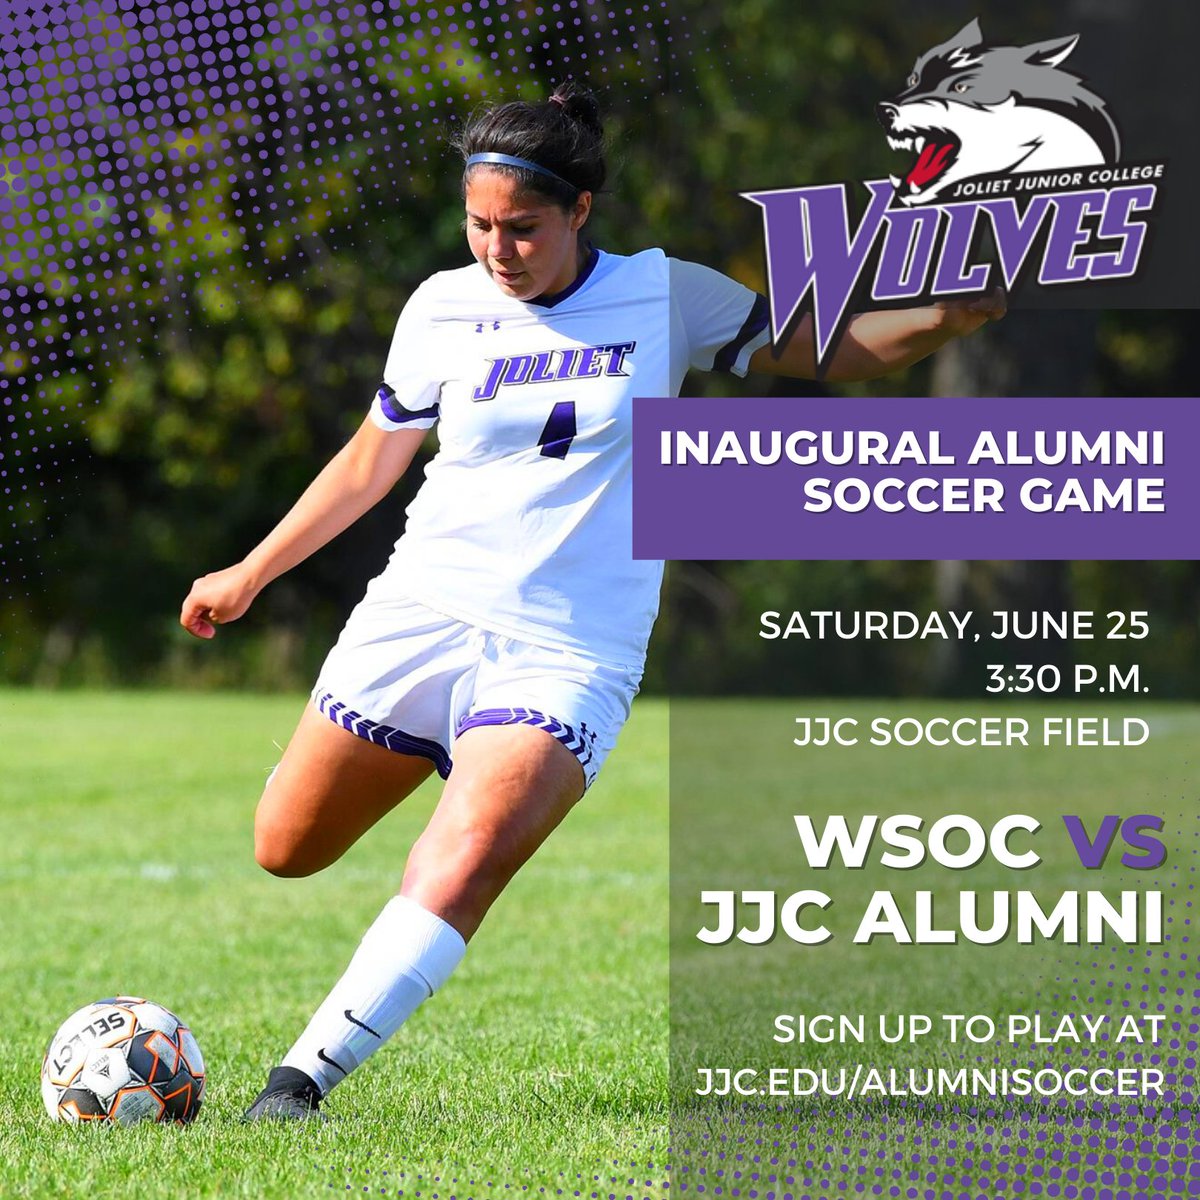 🐺⚽ Hey, Alumni Wolves! Did you play women's soccer at JJC? If so, it's time to lace up those boots! Join us for our Inaugural Alumni Soccer Game on June 25th! Catch up with past and current players during a fun afternoon on Main Campus. To sign up, visit jjc.edu/alumnisoccer